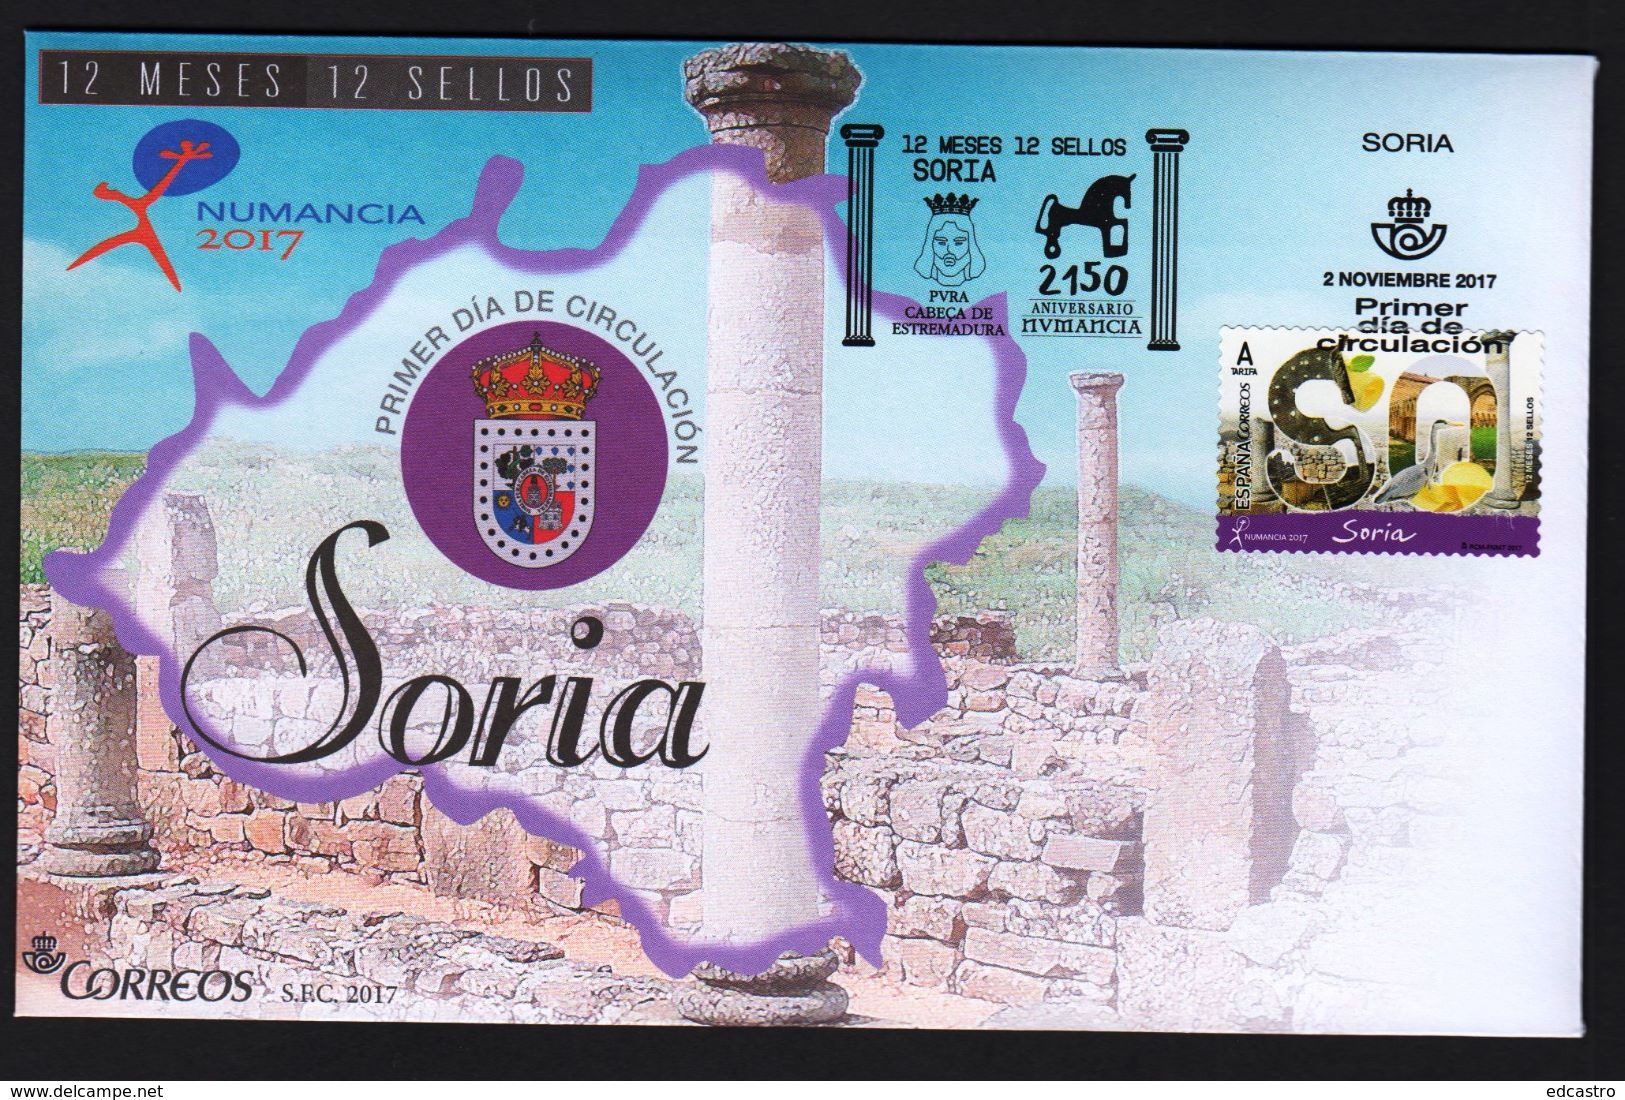 SPAIN ESPAGNE 2017 FDC SORIA 12 MONTHS 12 STAMPS - FDC